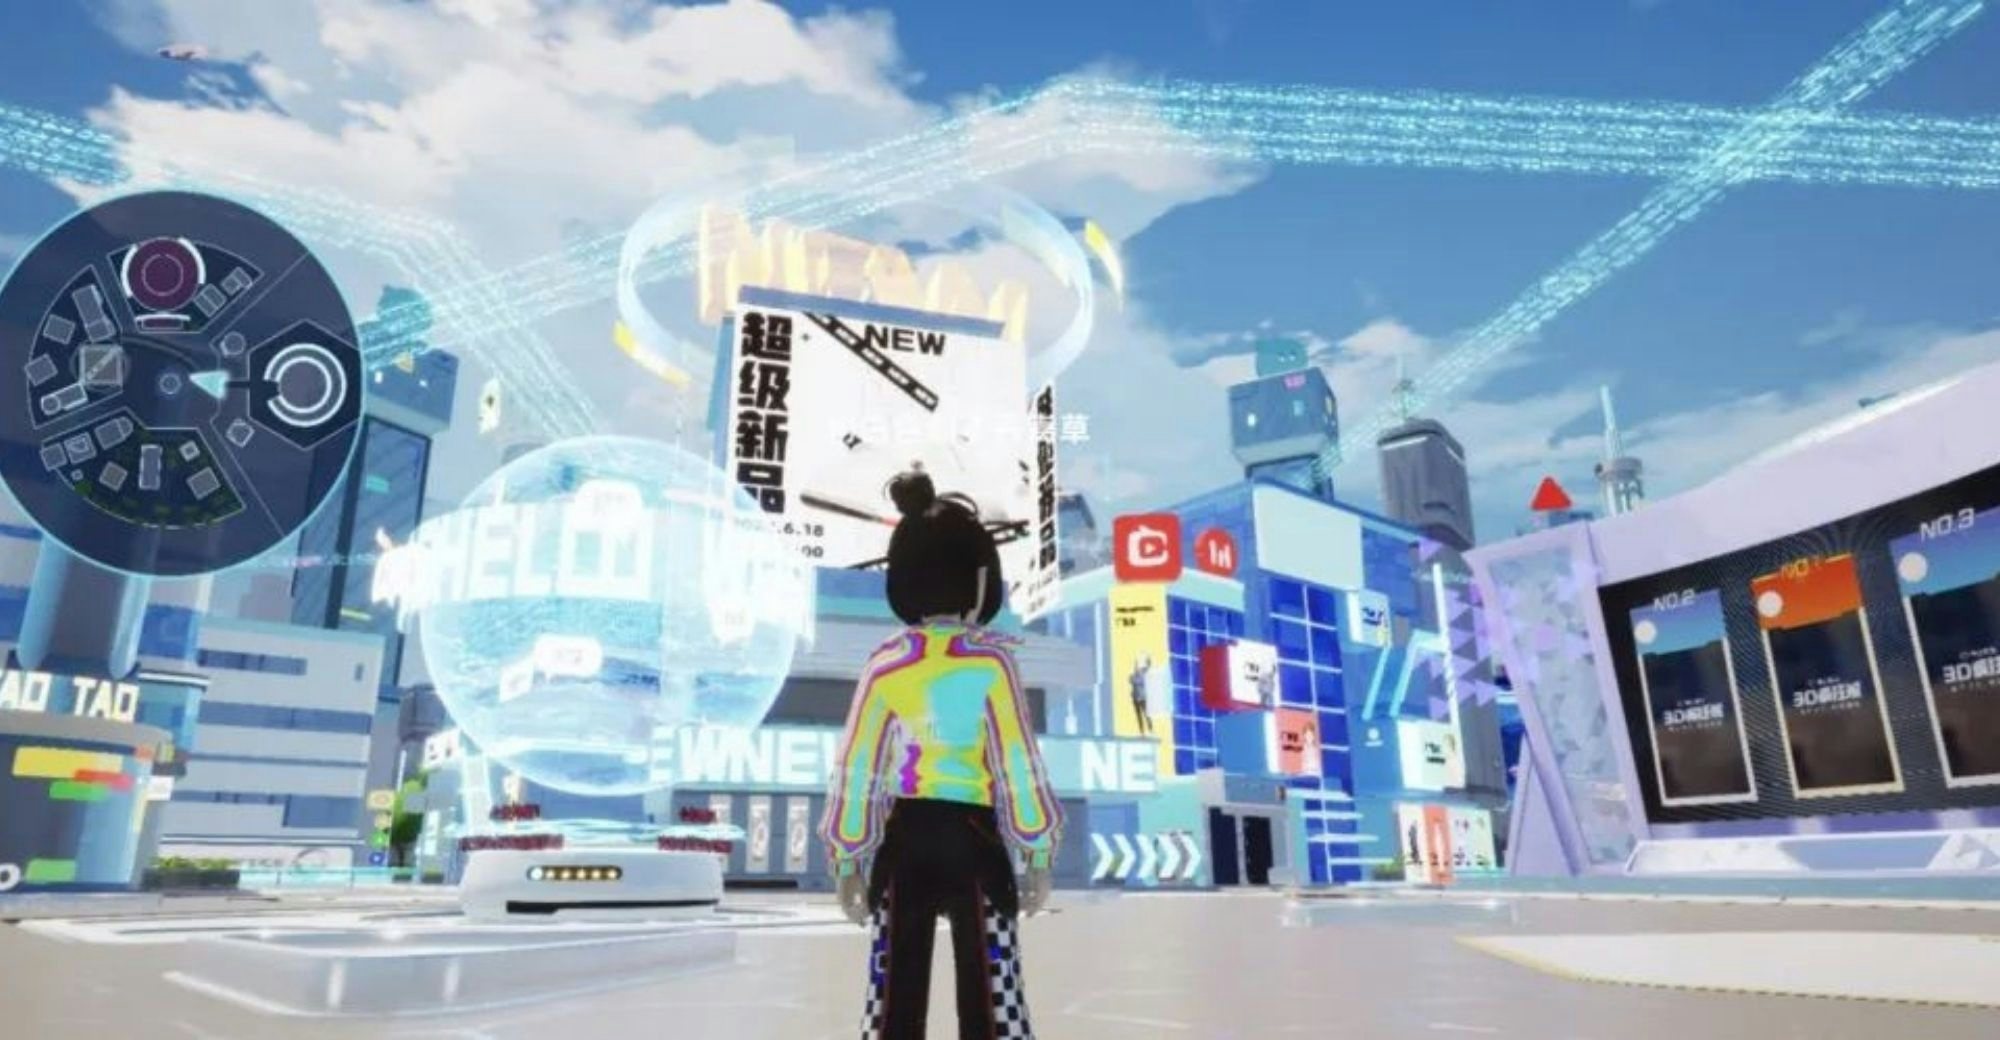 Taobao's latest venture in the metaverse is a fully immersive virtual mall. What does this mean for the future of shopping? Photo: Tech Planet